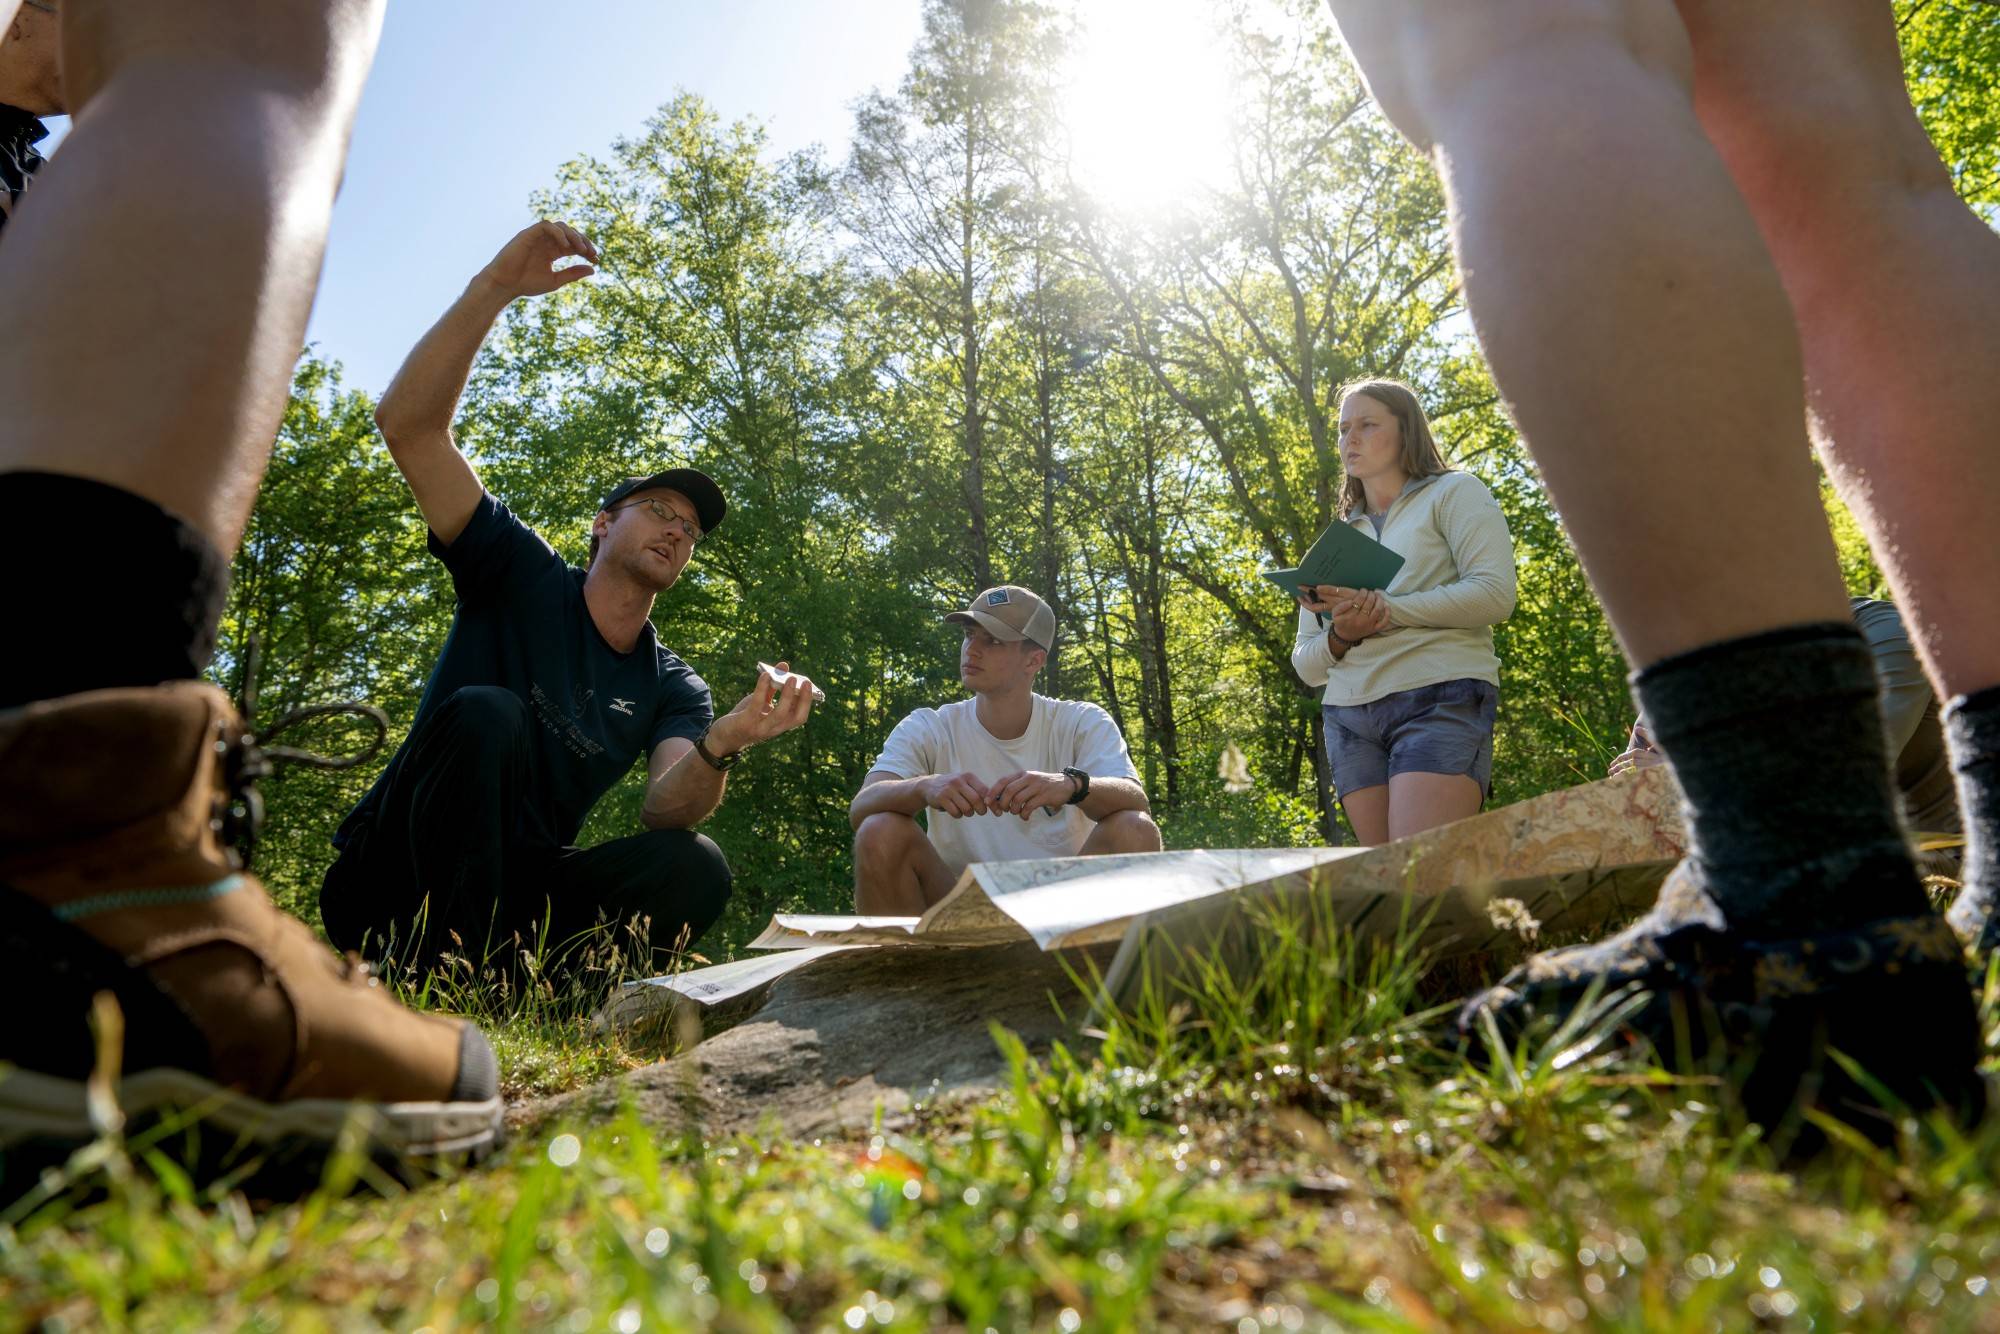 Kevin Osborne leads a navigation lesson at the start of the backpacking portion of the class.